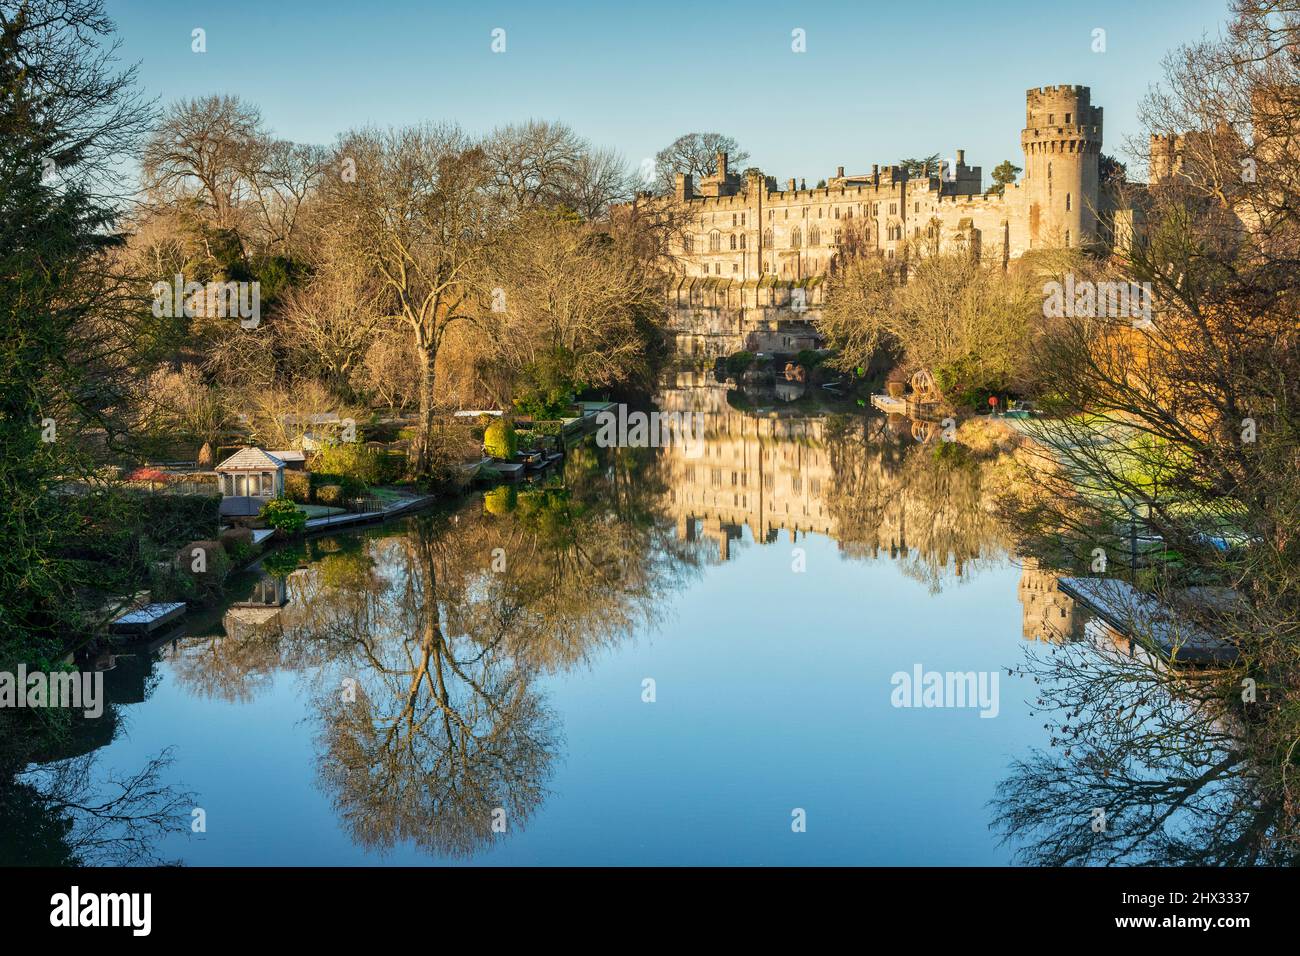 17 January 2022: Warwick Castle, Warwickshire, UK - Warwick Castle reflected in the River Avon on a beautiful sunny winter day with clear blue sky. Stock Photo